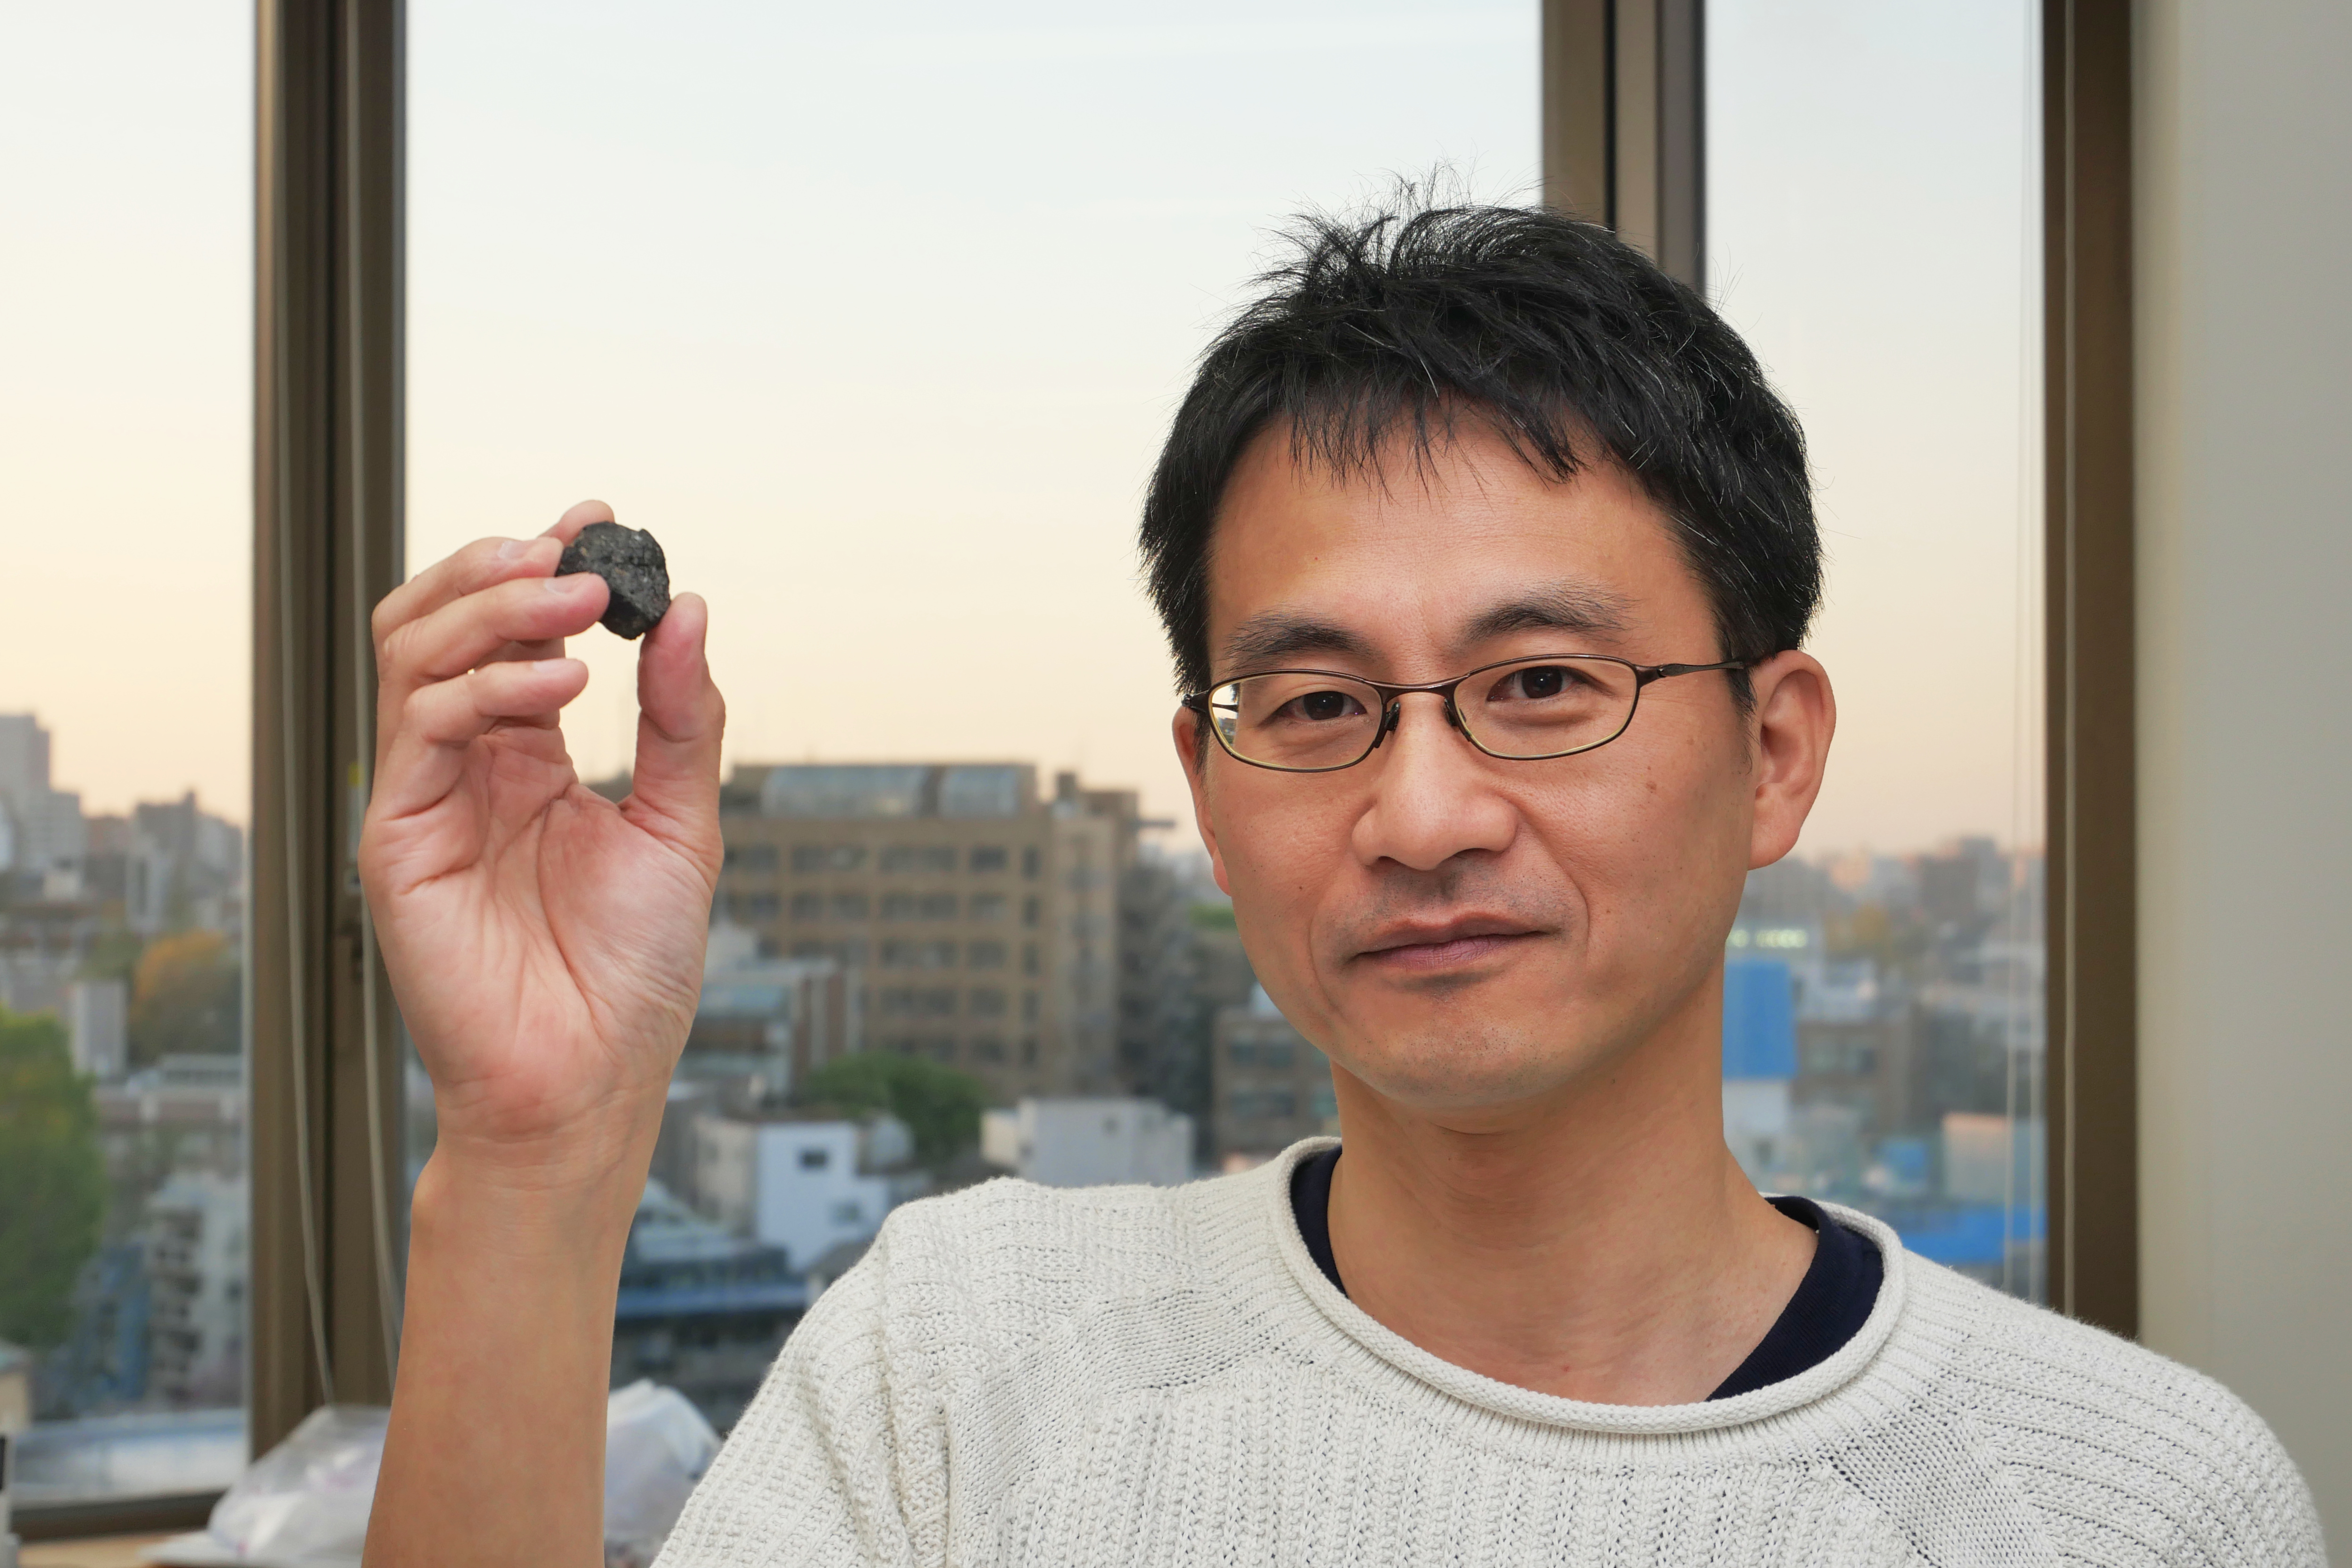 Portrait photo. Man on the right holding a small rock. The background is sunset over a cityscape.